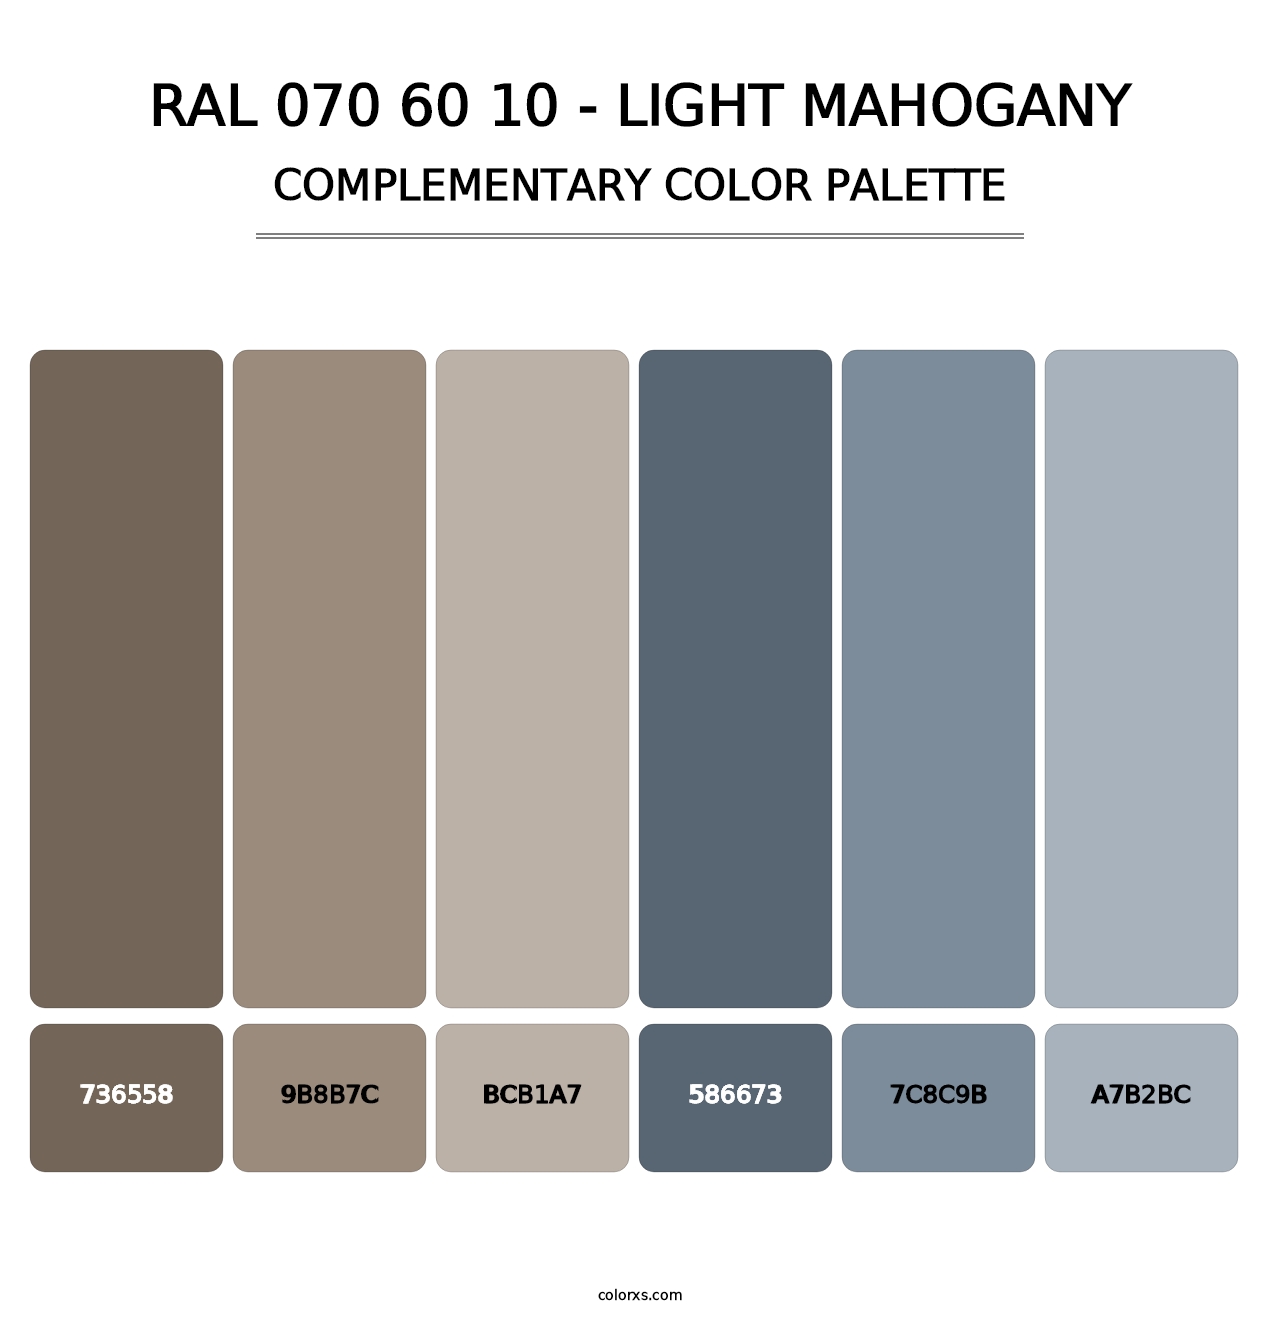 RAL 070 60 10 - Light Mahogany - Complementary Color Palette